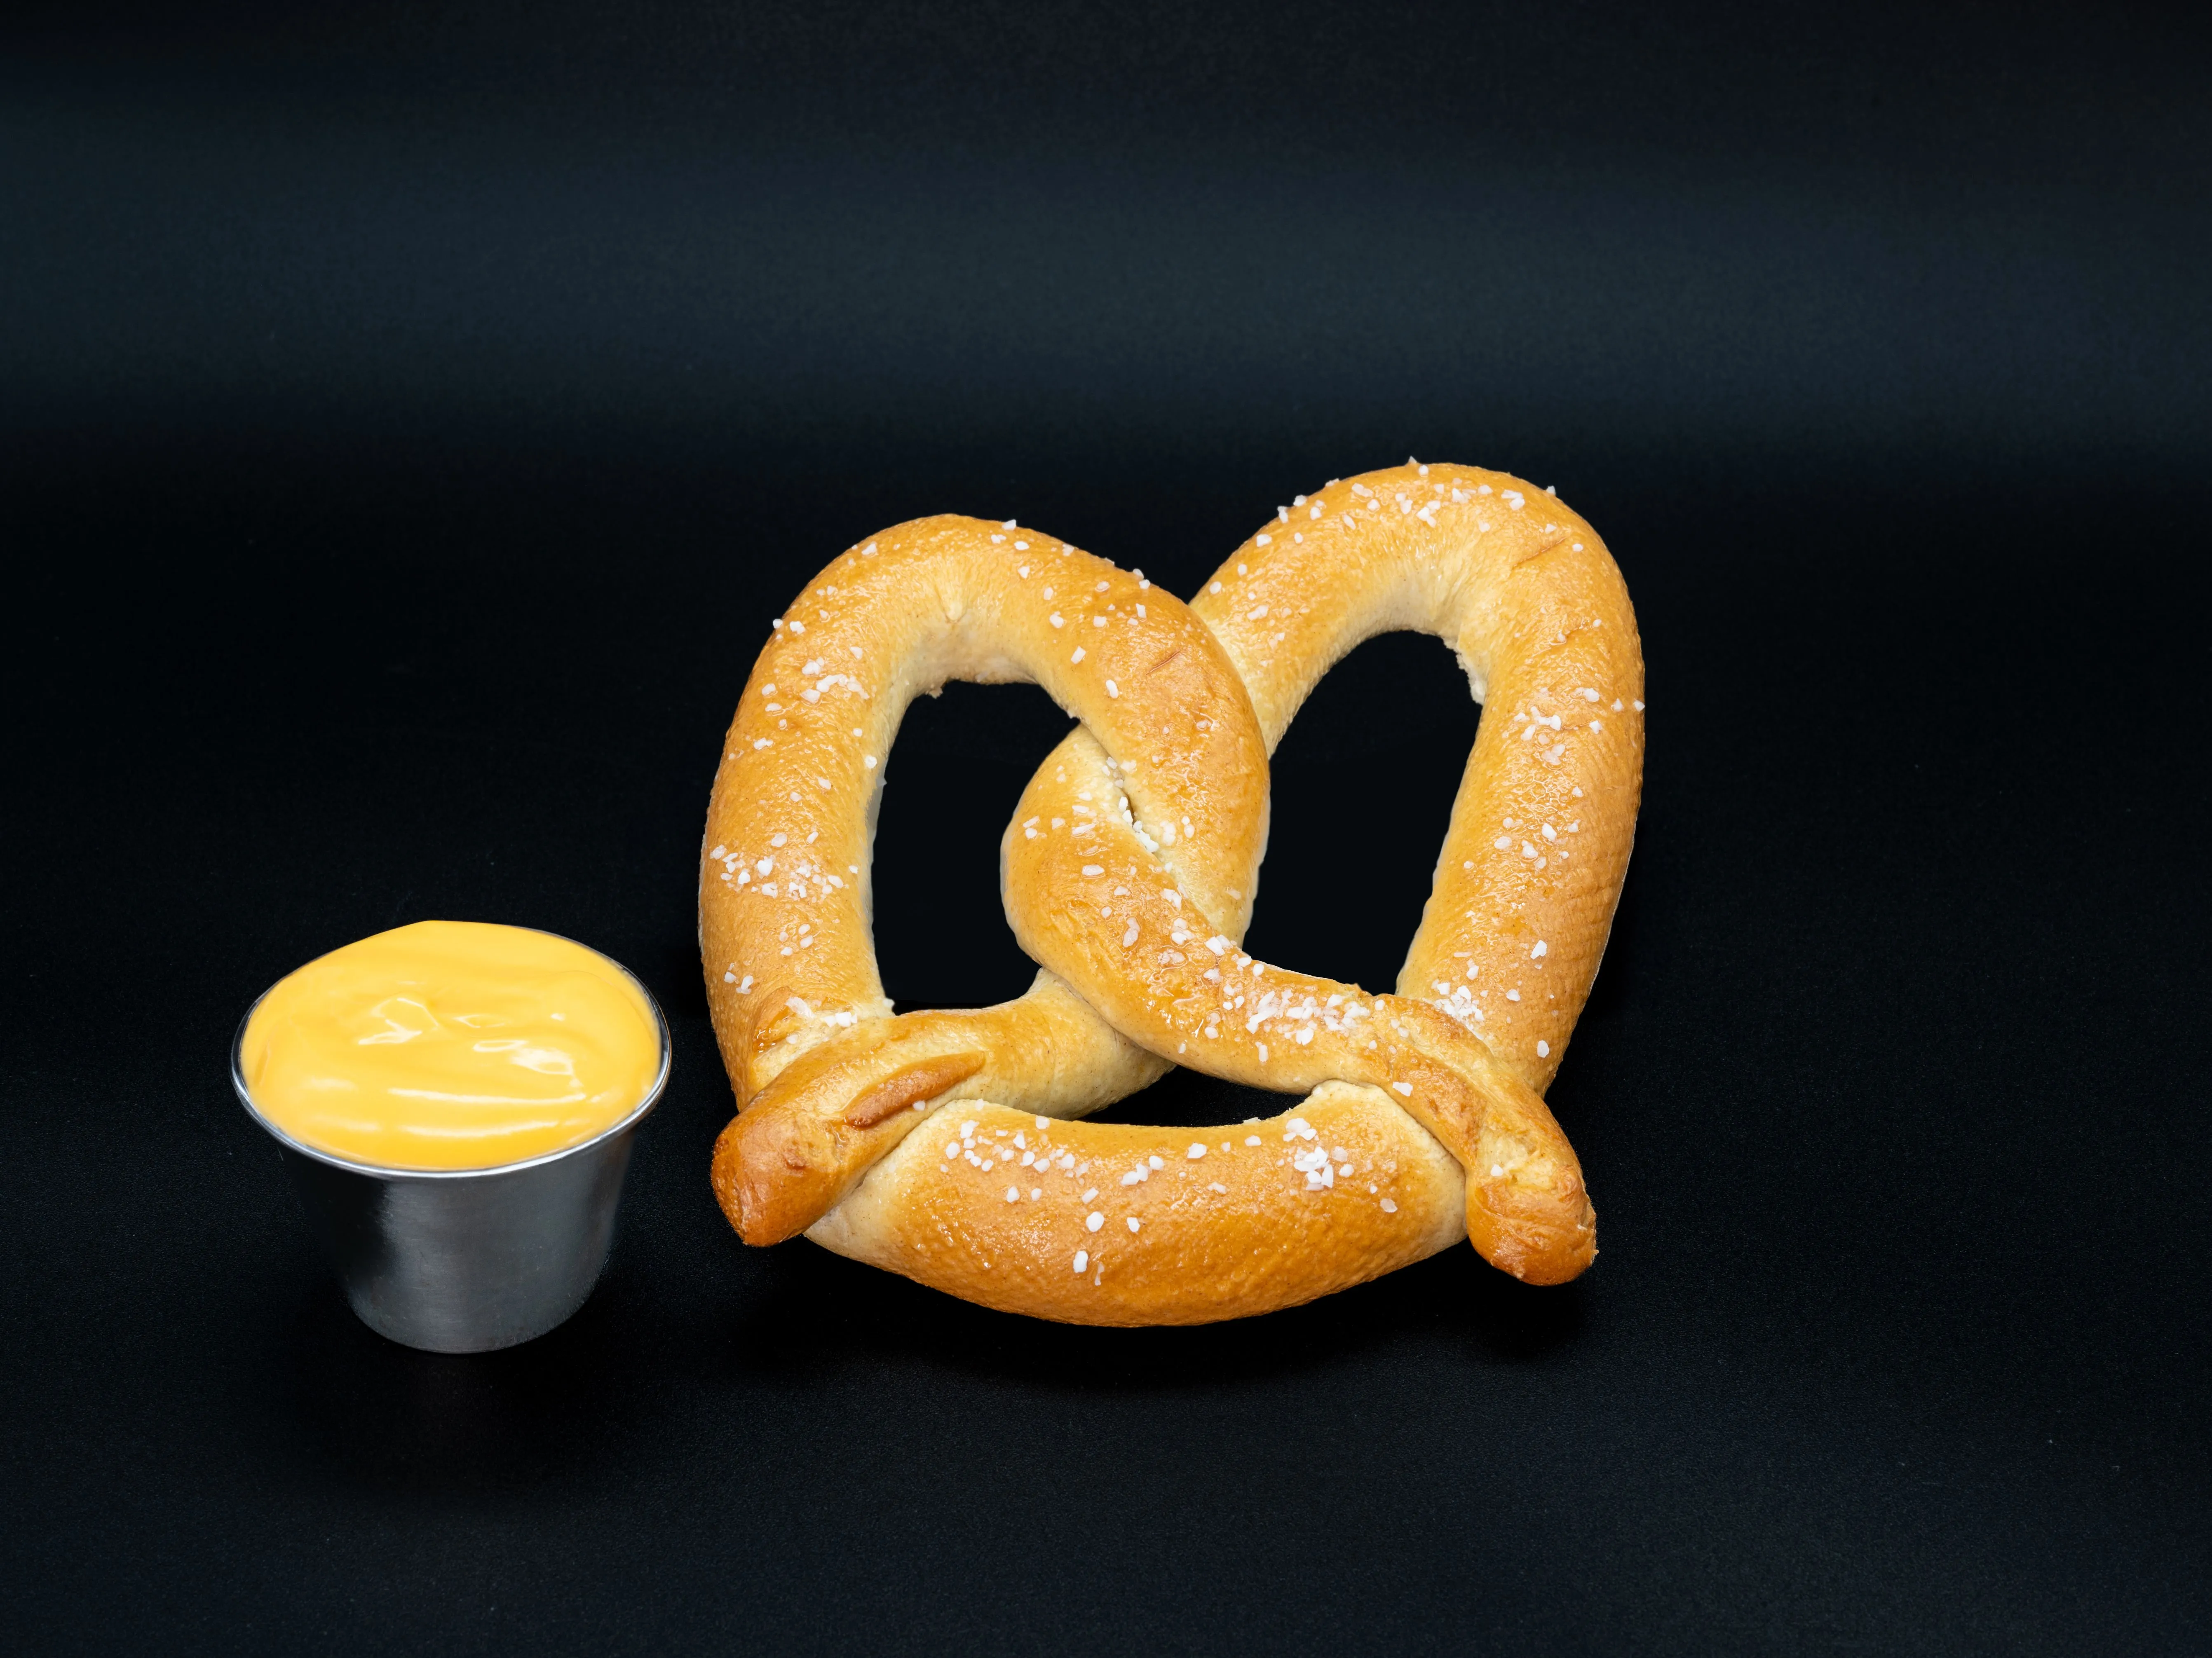 A baked pretzel with salt crystals on top alongside a small container of cheese sauce, both placed on a black background.